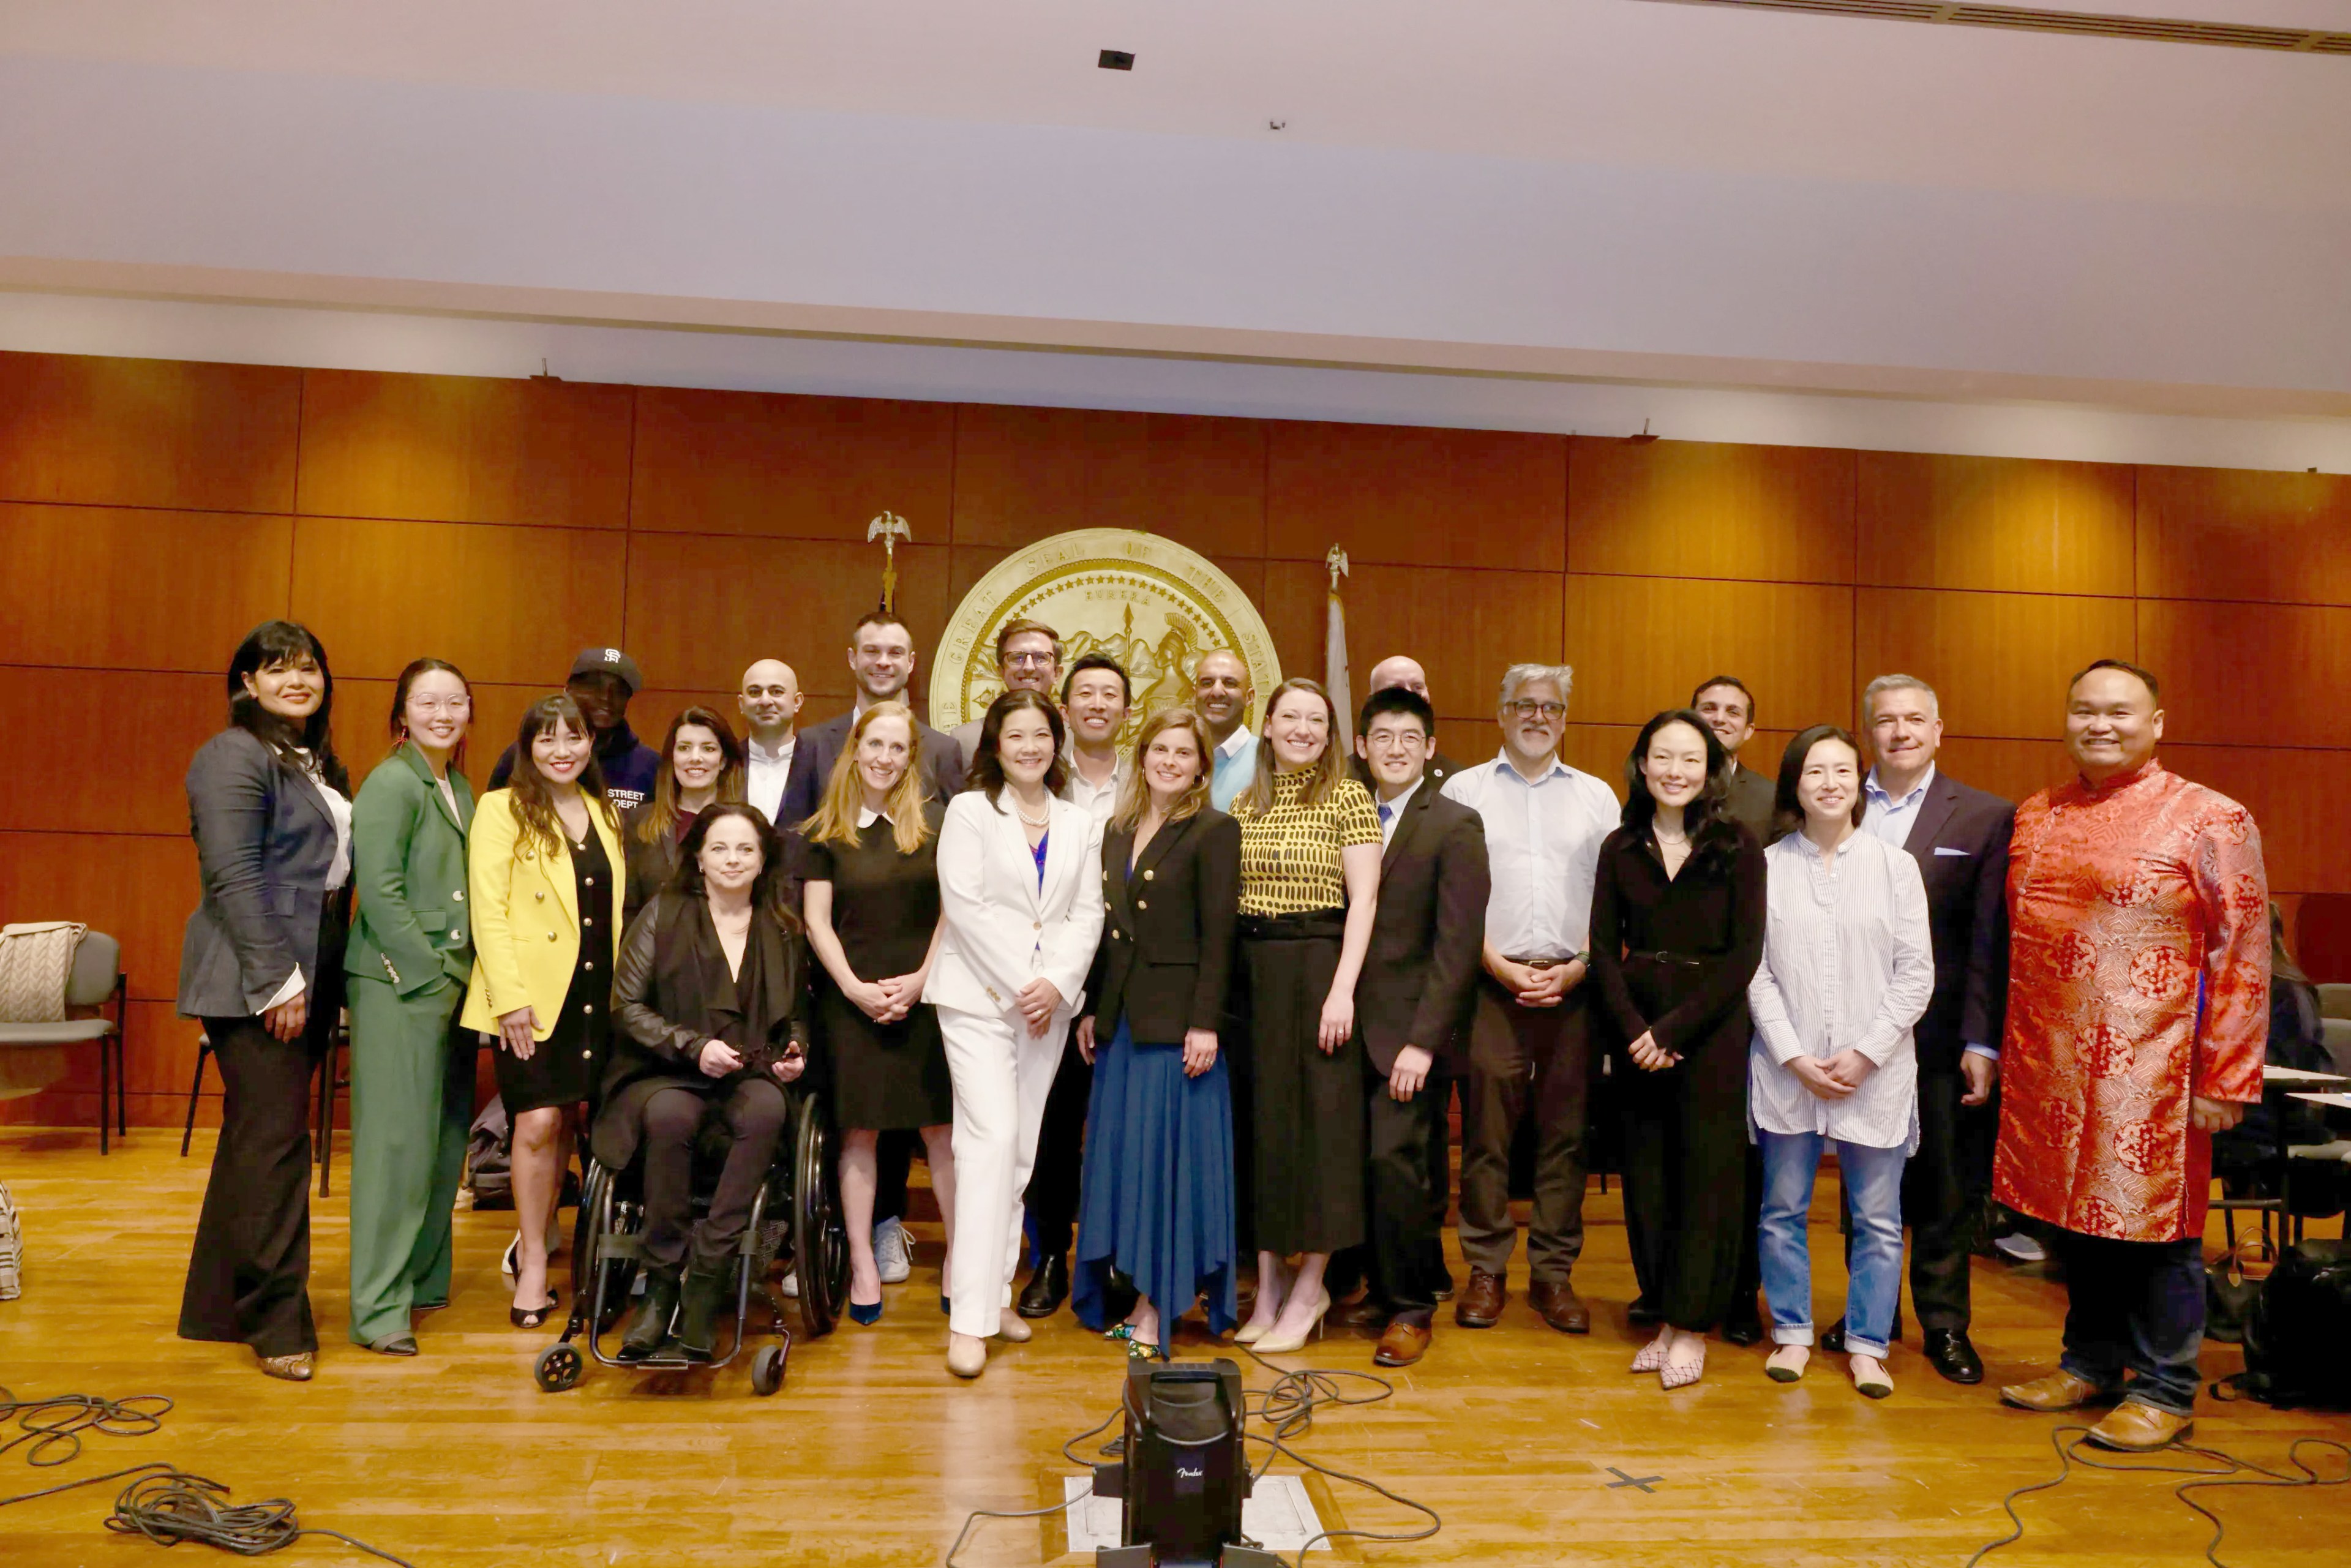 Group of diverse people posing in a room, some standing and one in a wheelchair, smiling at the camera.